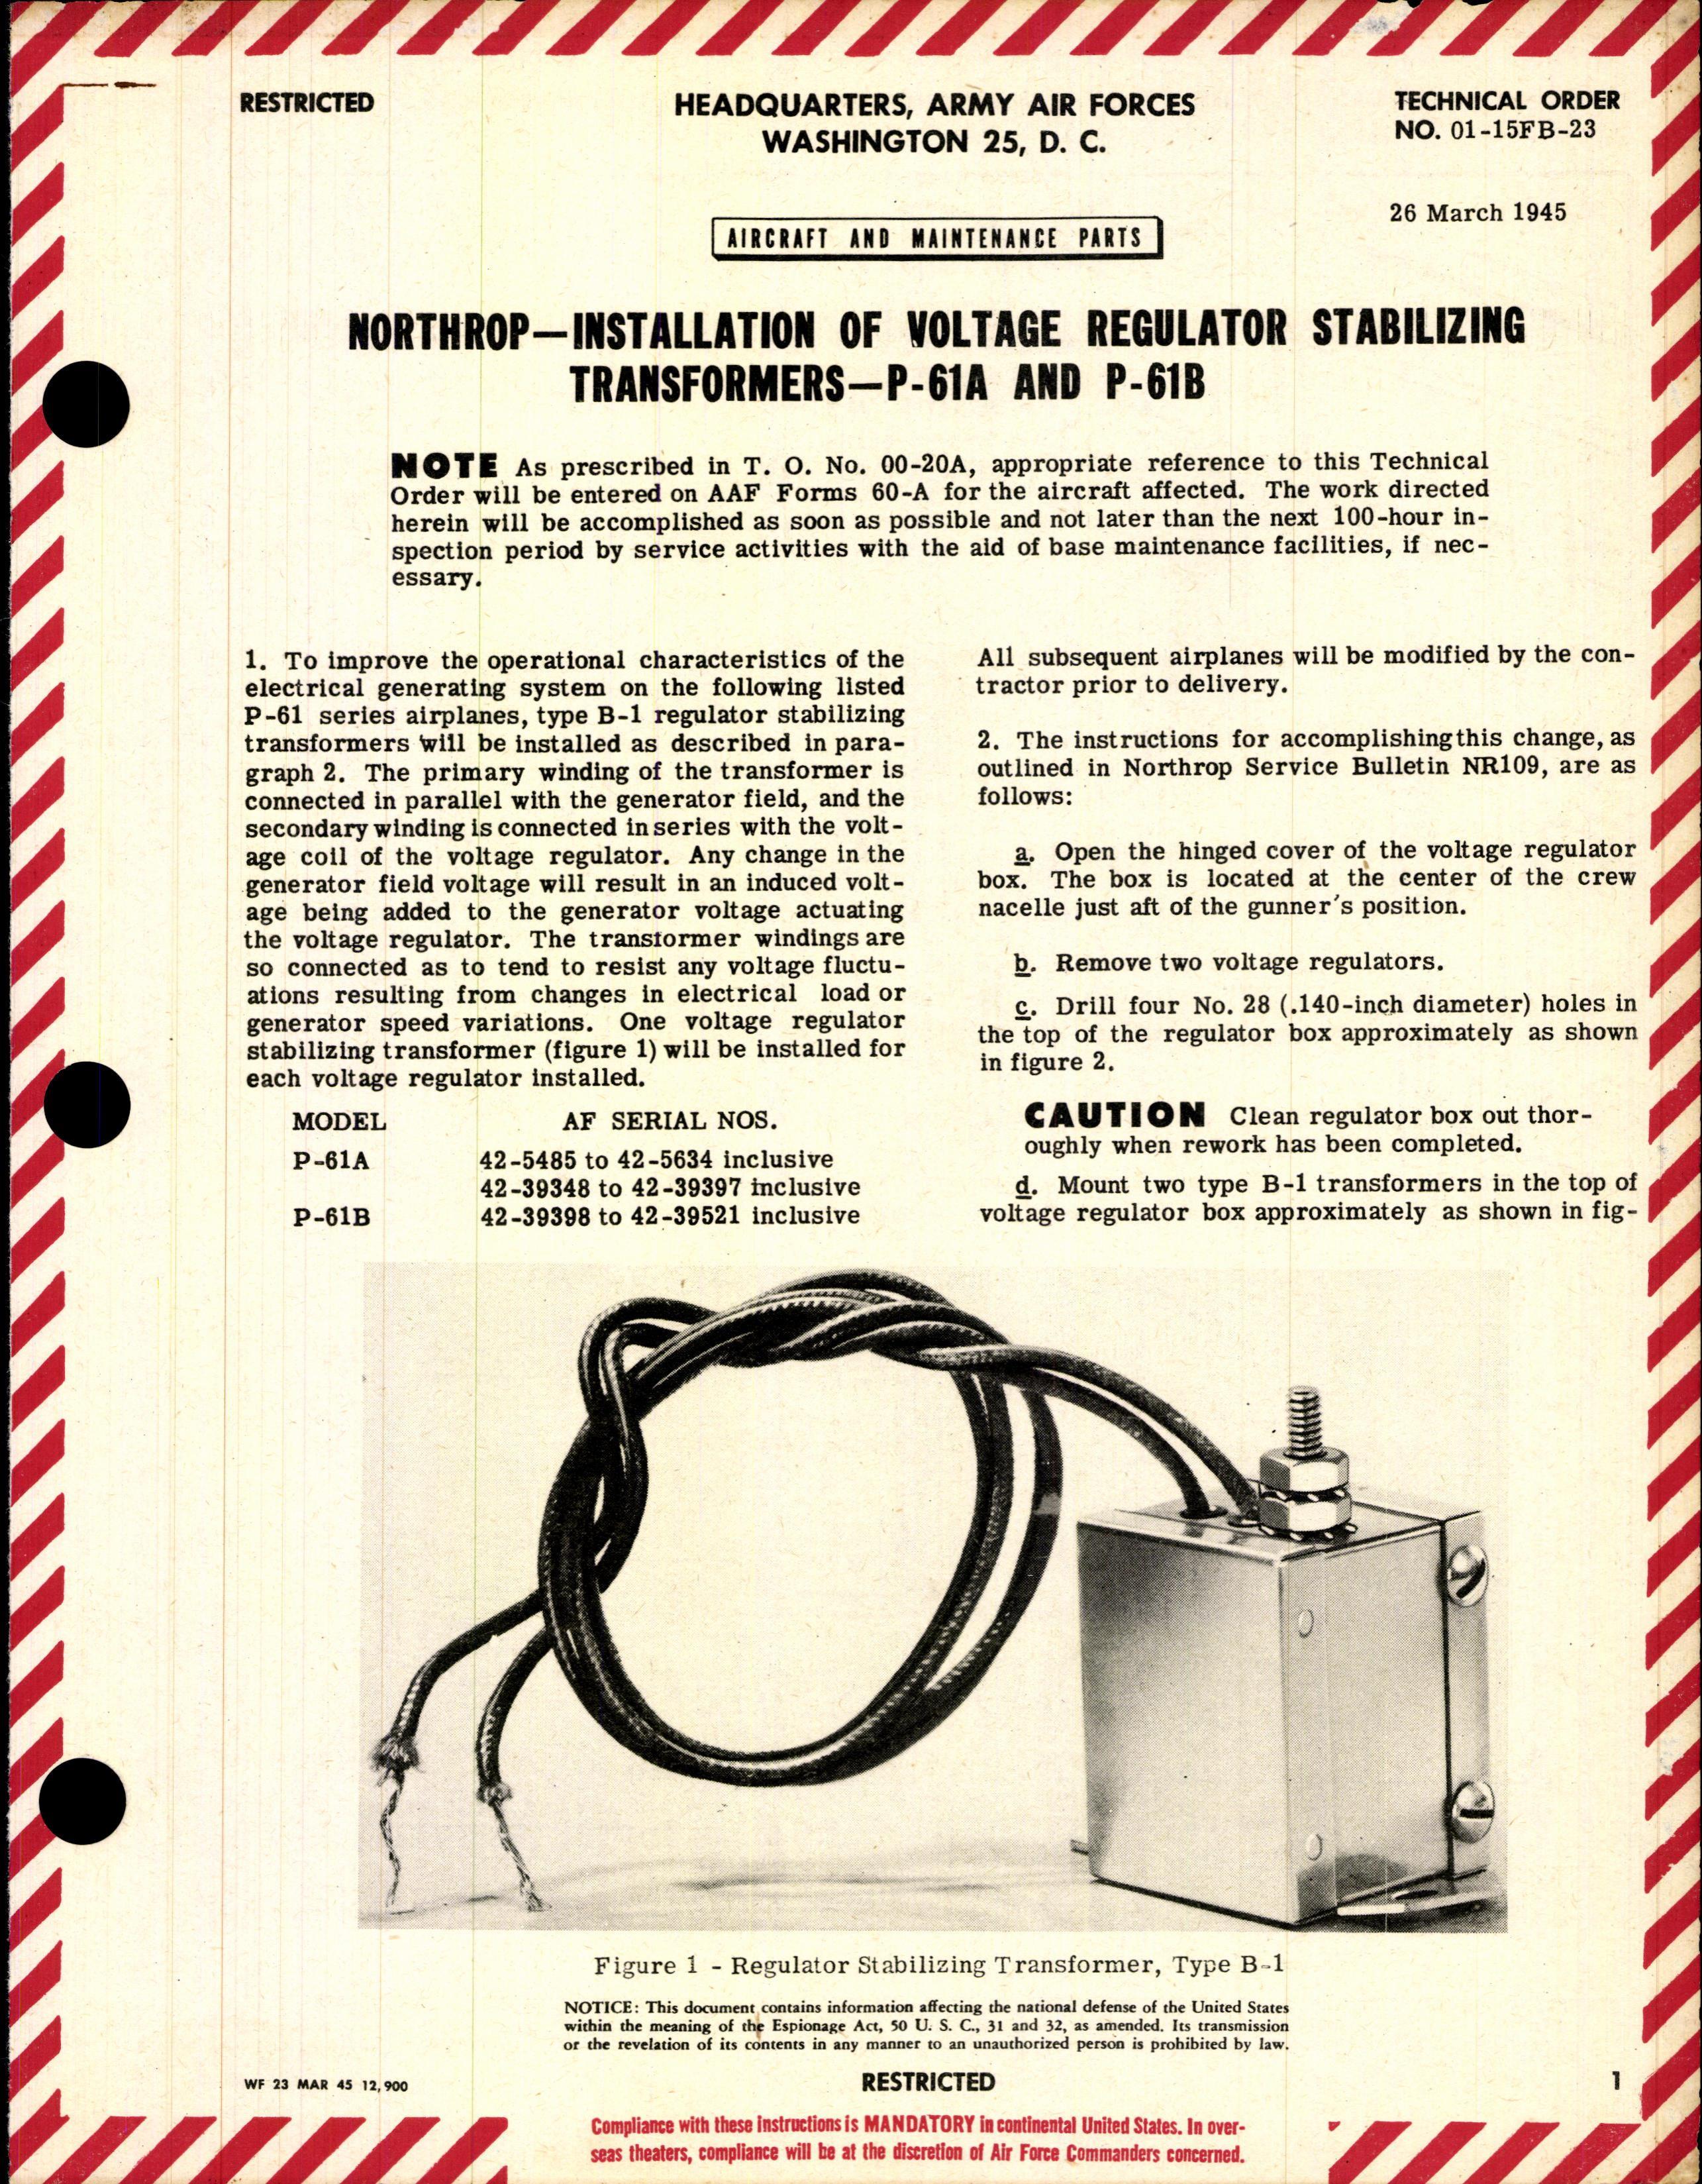 Sample page 1 from AirCorps Library document: Installation of Voltage Regulator Stabilizing Transformers for P-61A and P-61B